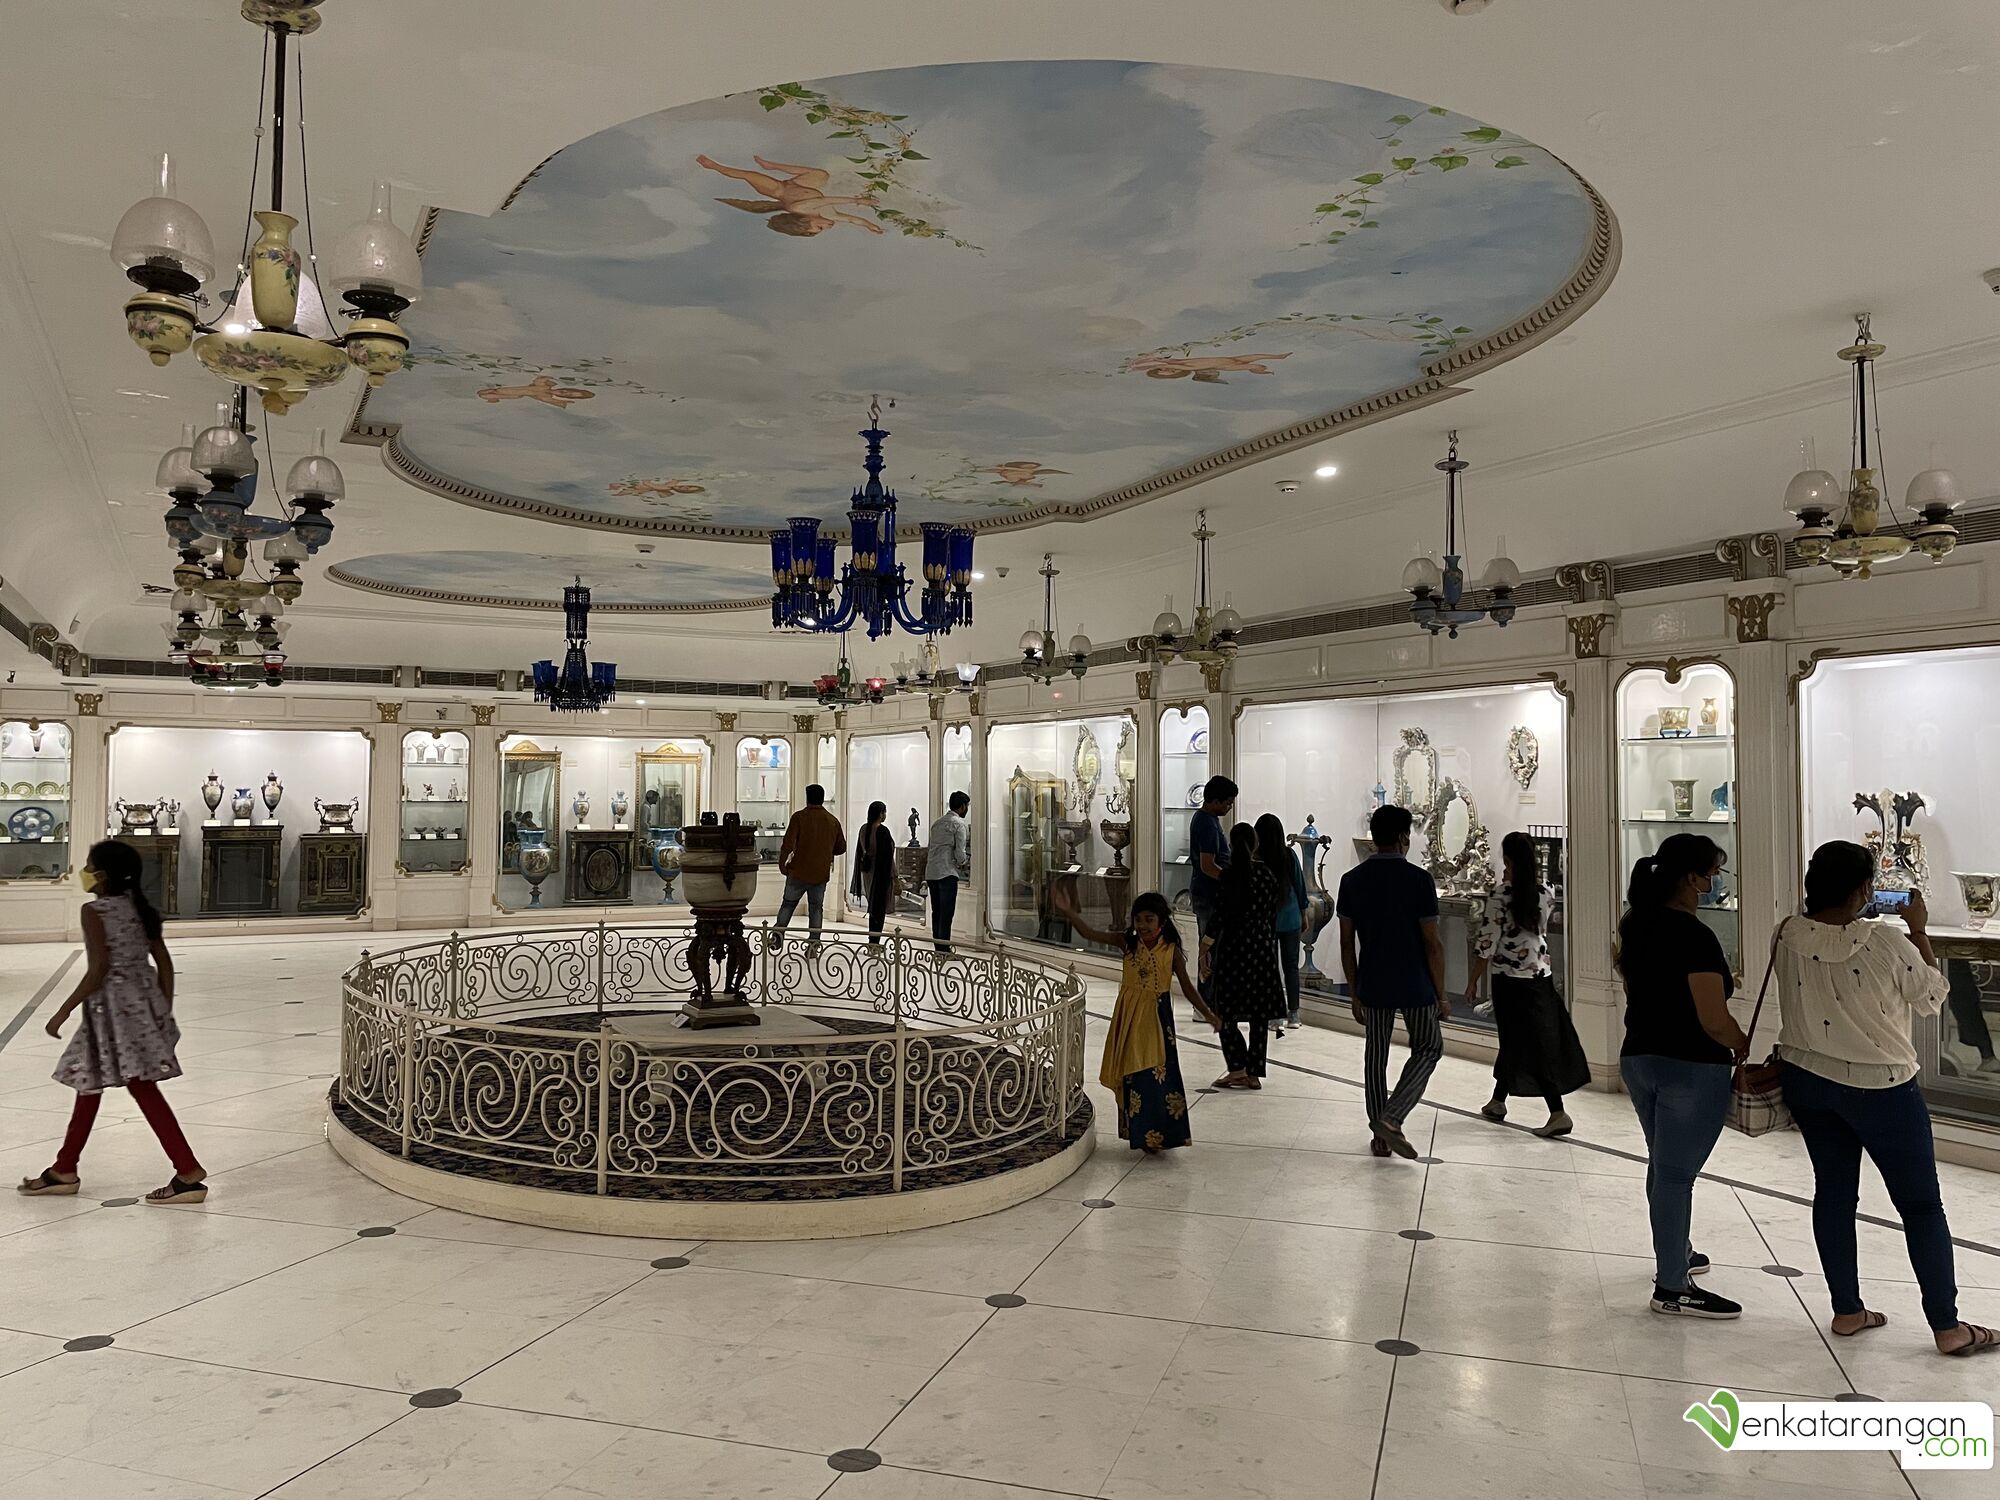 Porcelain collections, look at the beautifully decorated sky painting on the ceiling